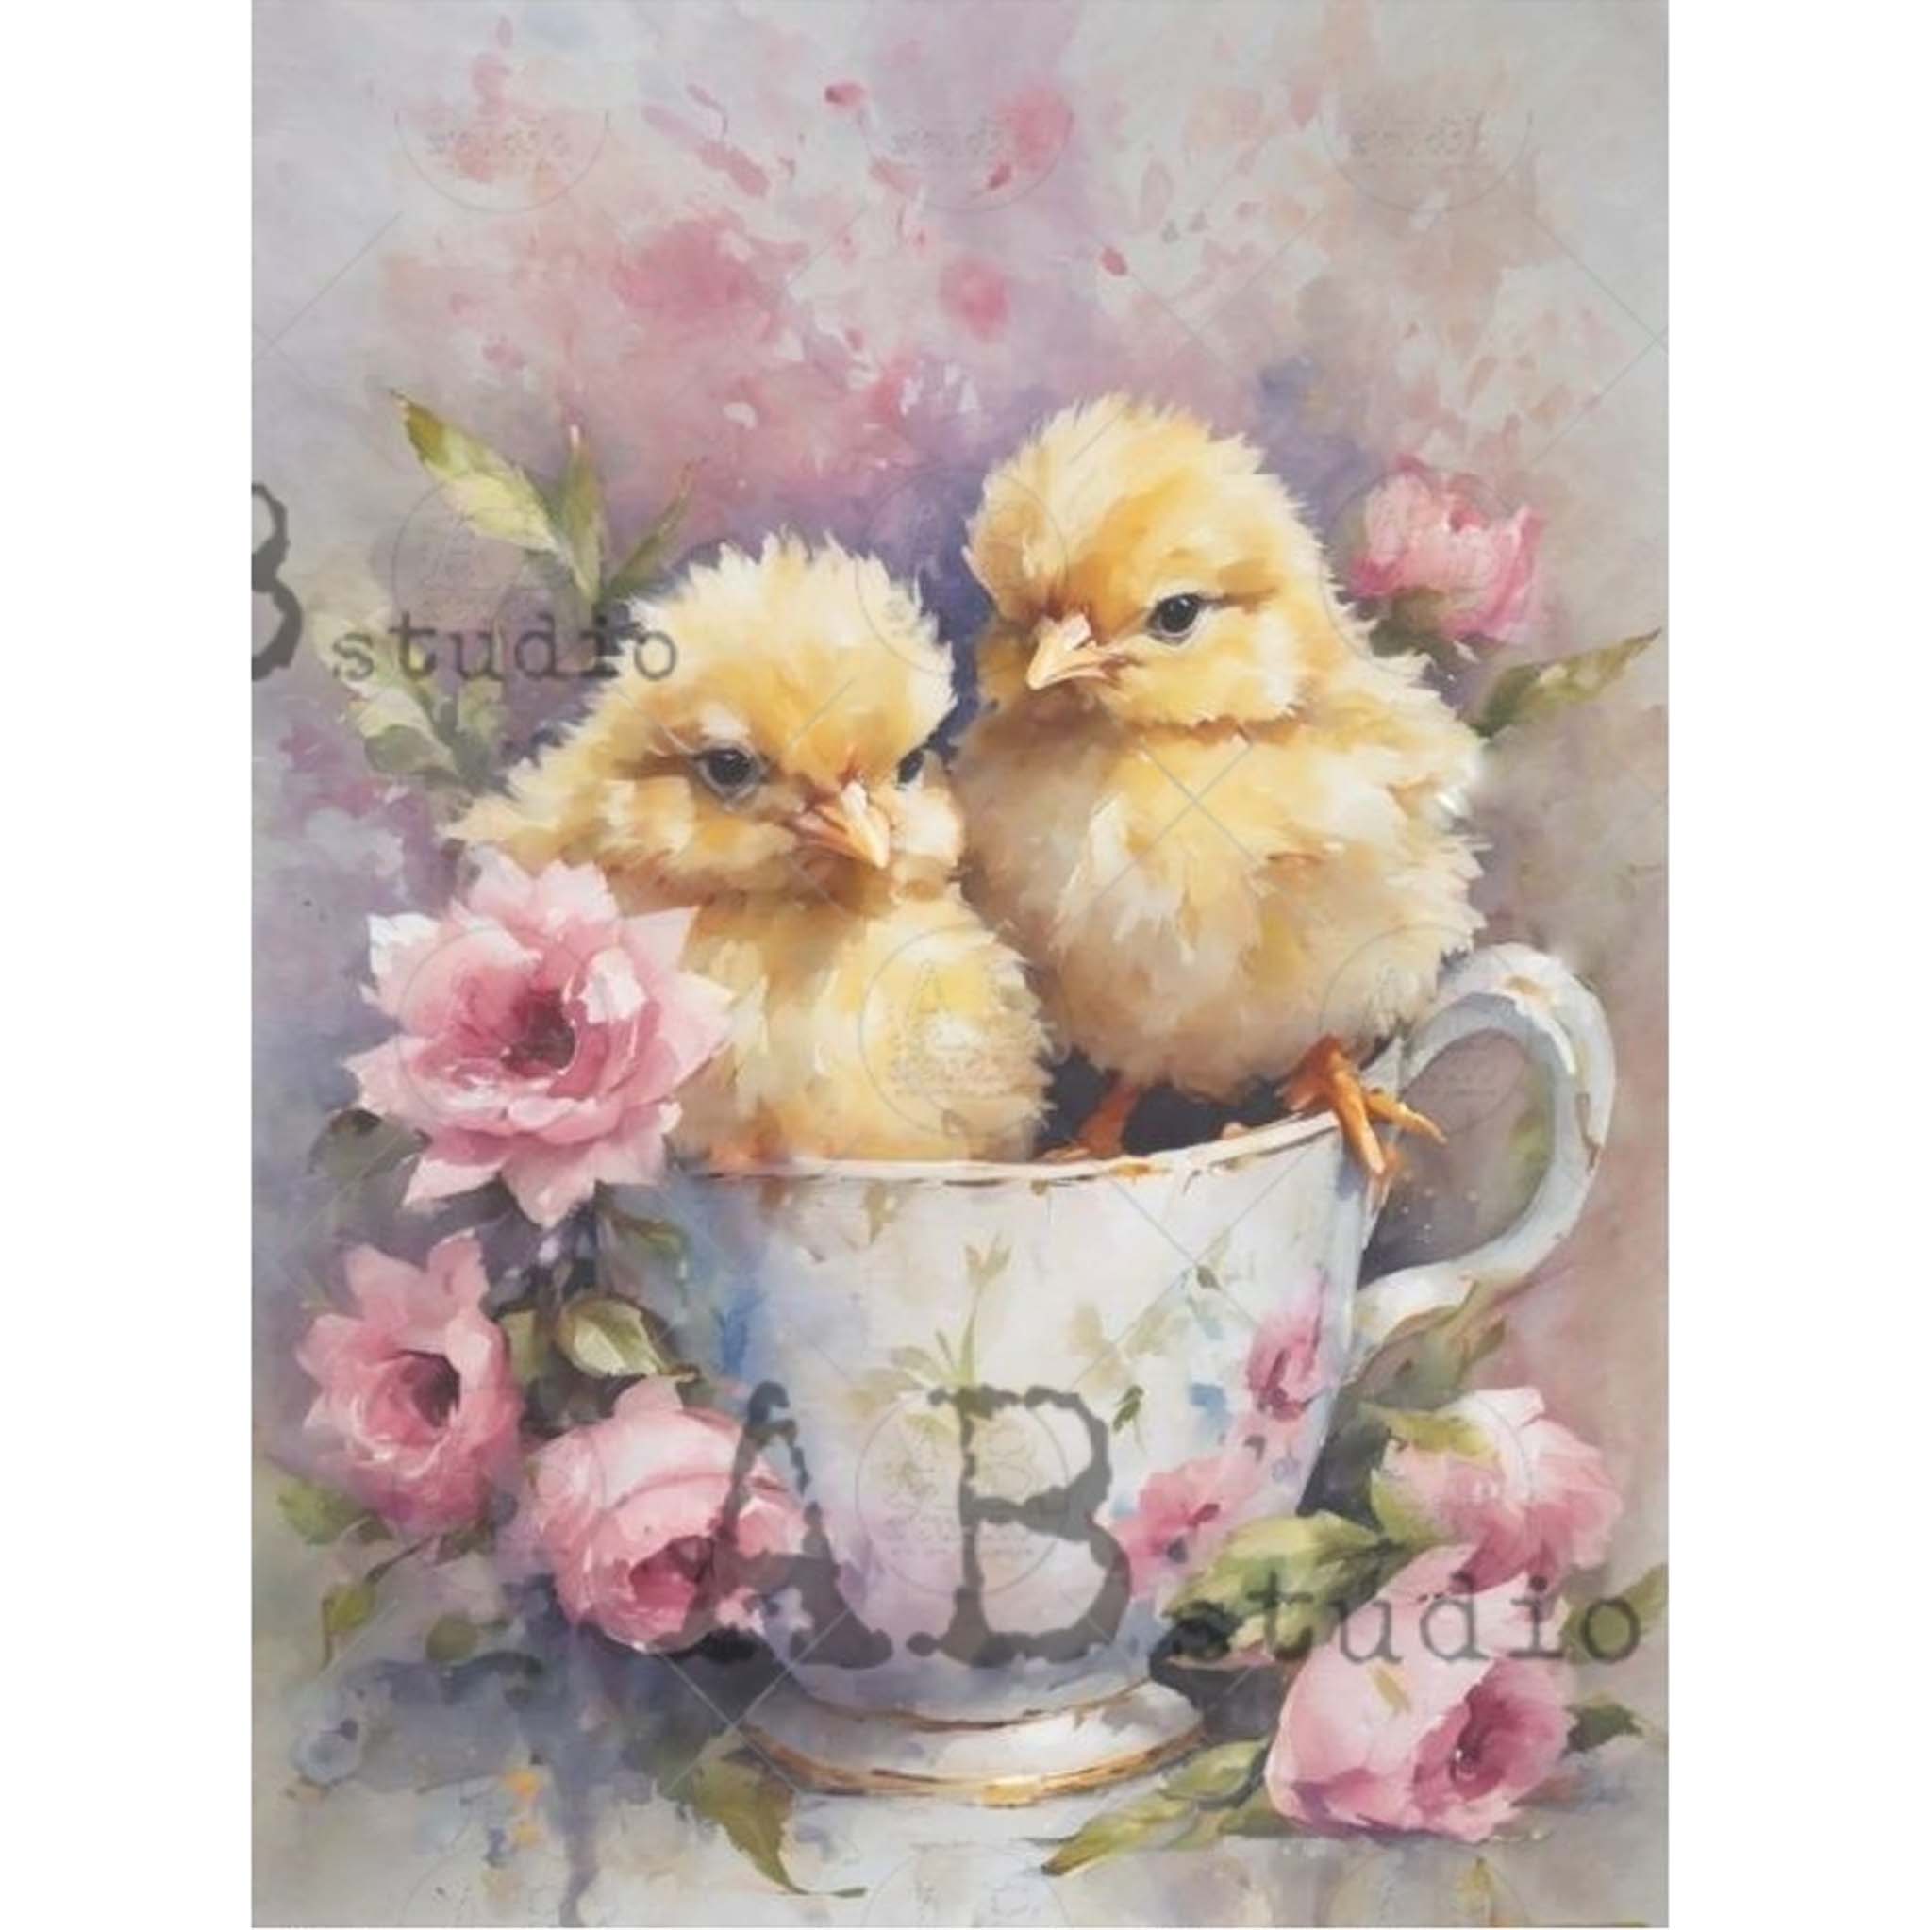 A4 rice paper design that features 2 cute yellow chicks nestled in a teacup, surrounded by sweet pink flowers and are against a white background.